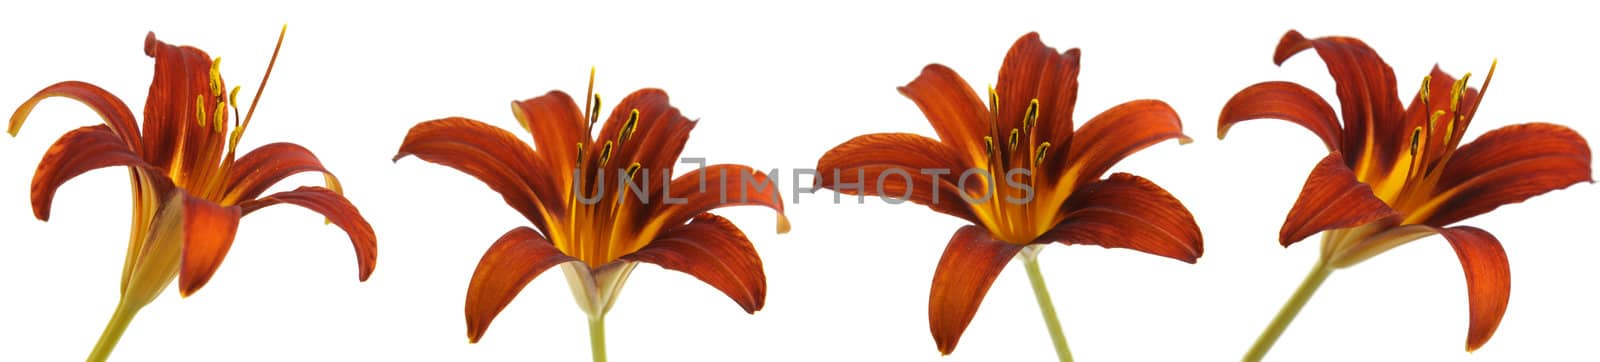 Red Lily Multiples
 by ca2hill